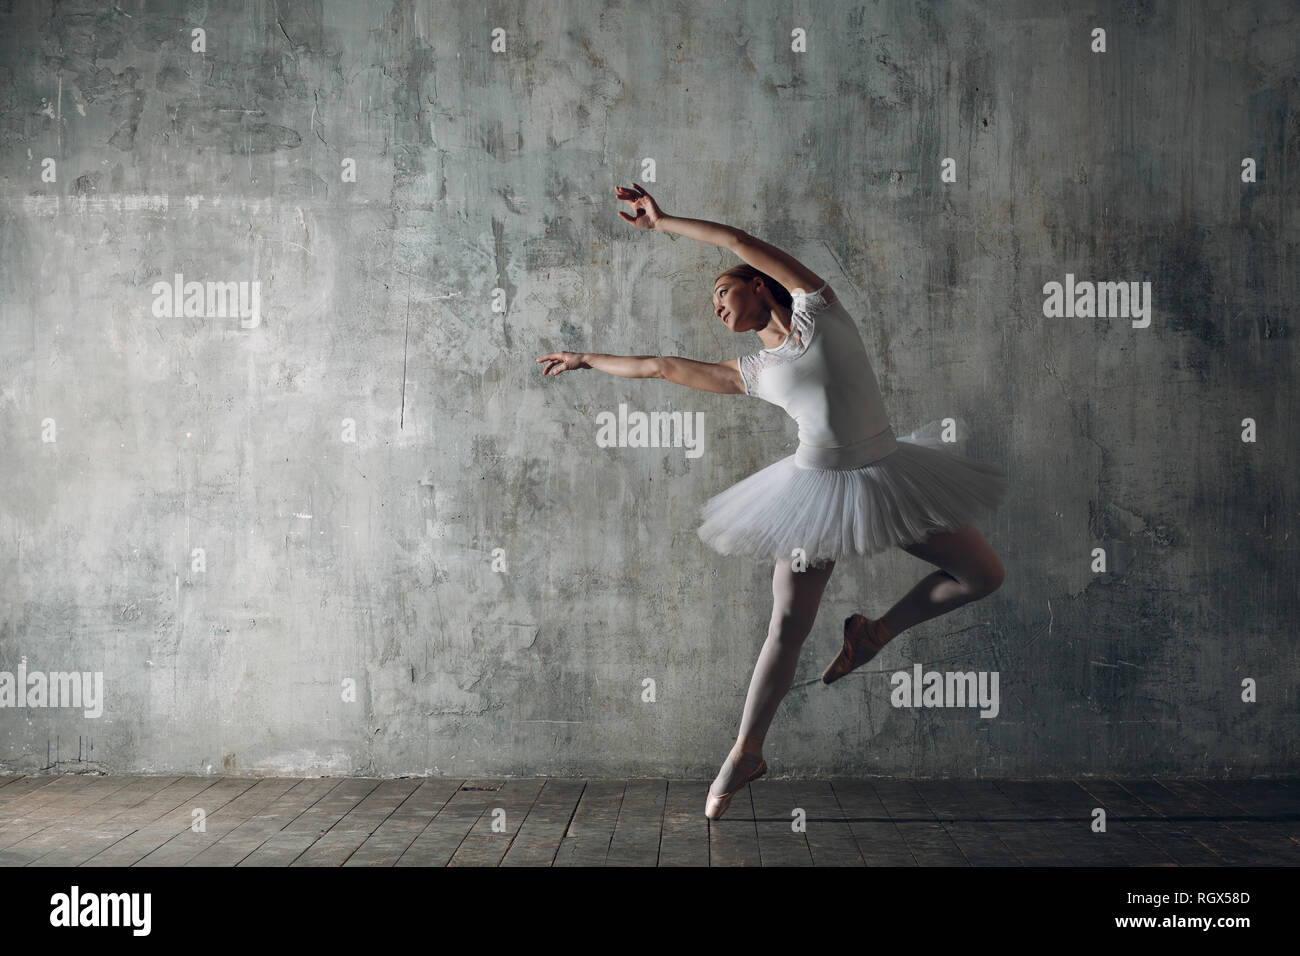 Ballerina female. Young beautiful woman ballet dancer, dressed in professional outfit, pointe shoes and white tutu. Stock Photo